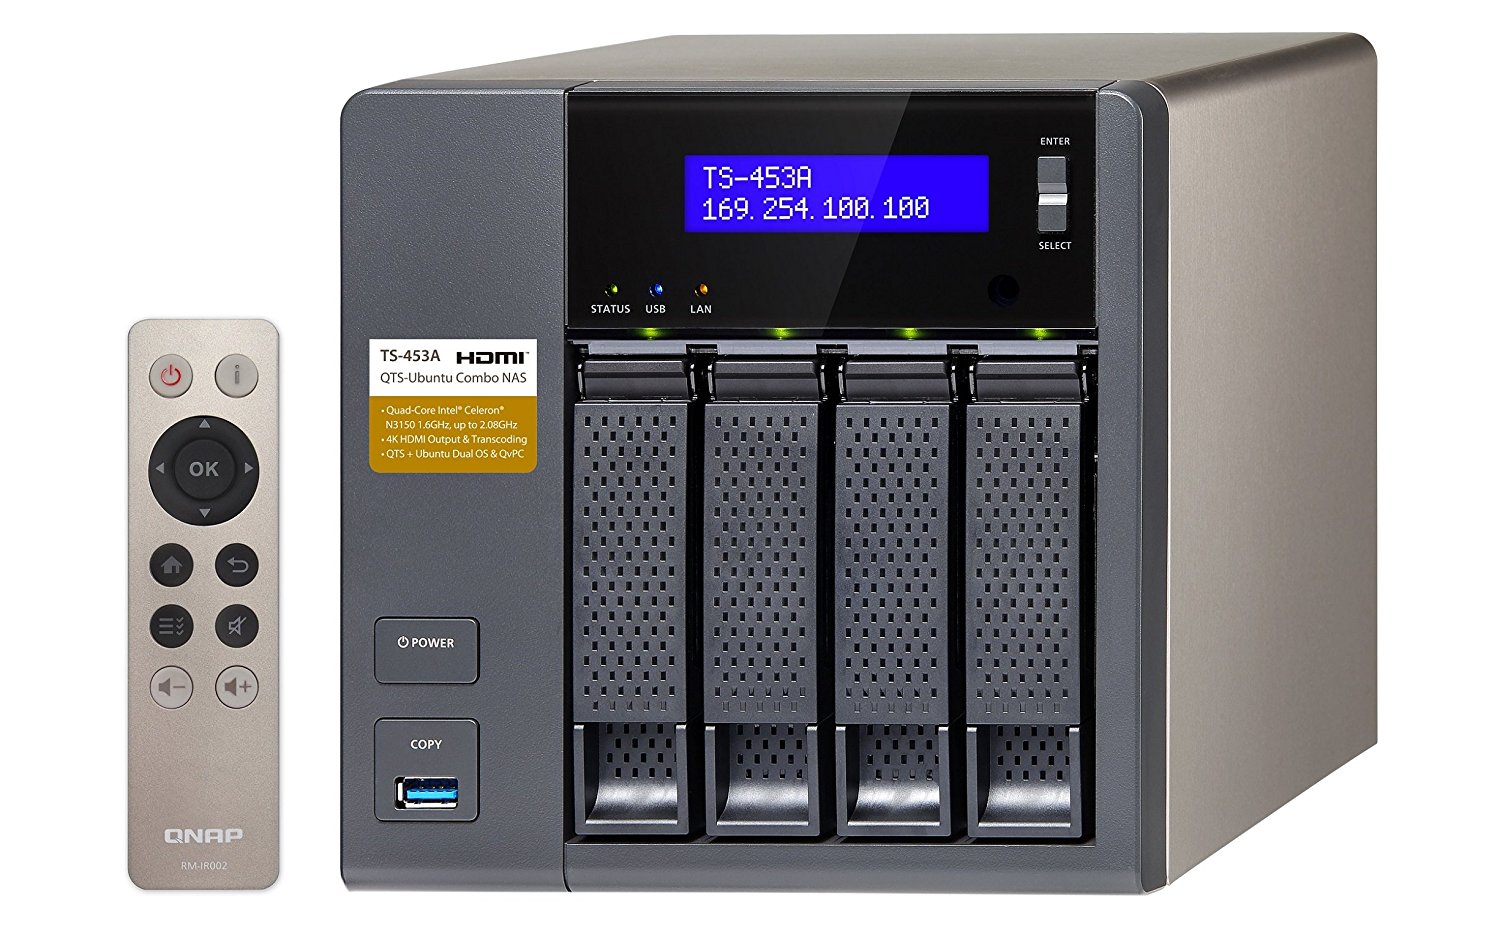 【Cybersale】QNAP TS-453A-4G NAS System 4-Bay QTS-Linux Combo NAS